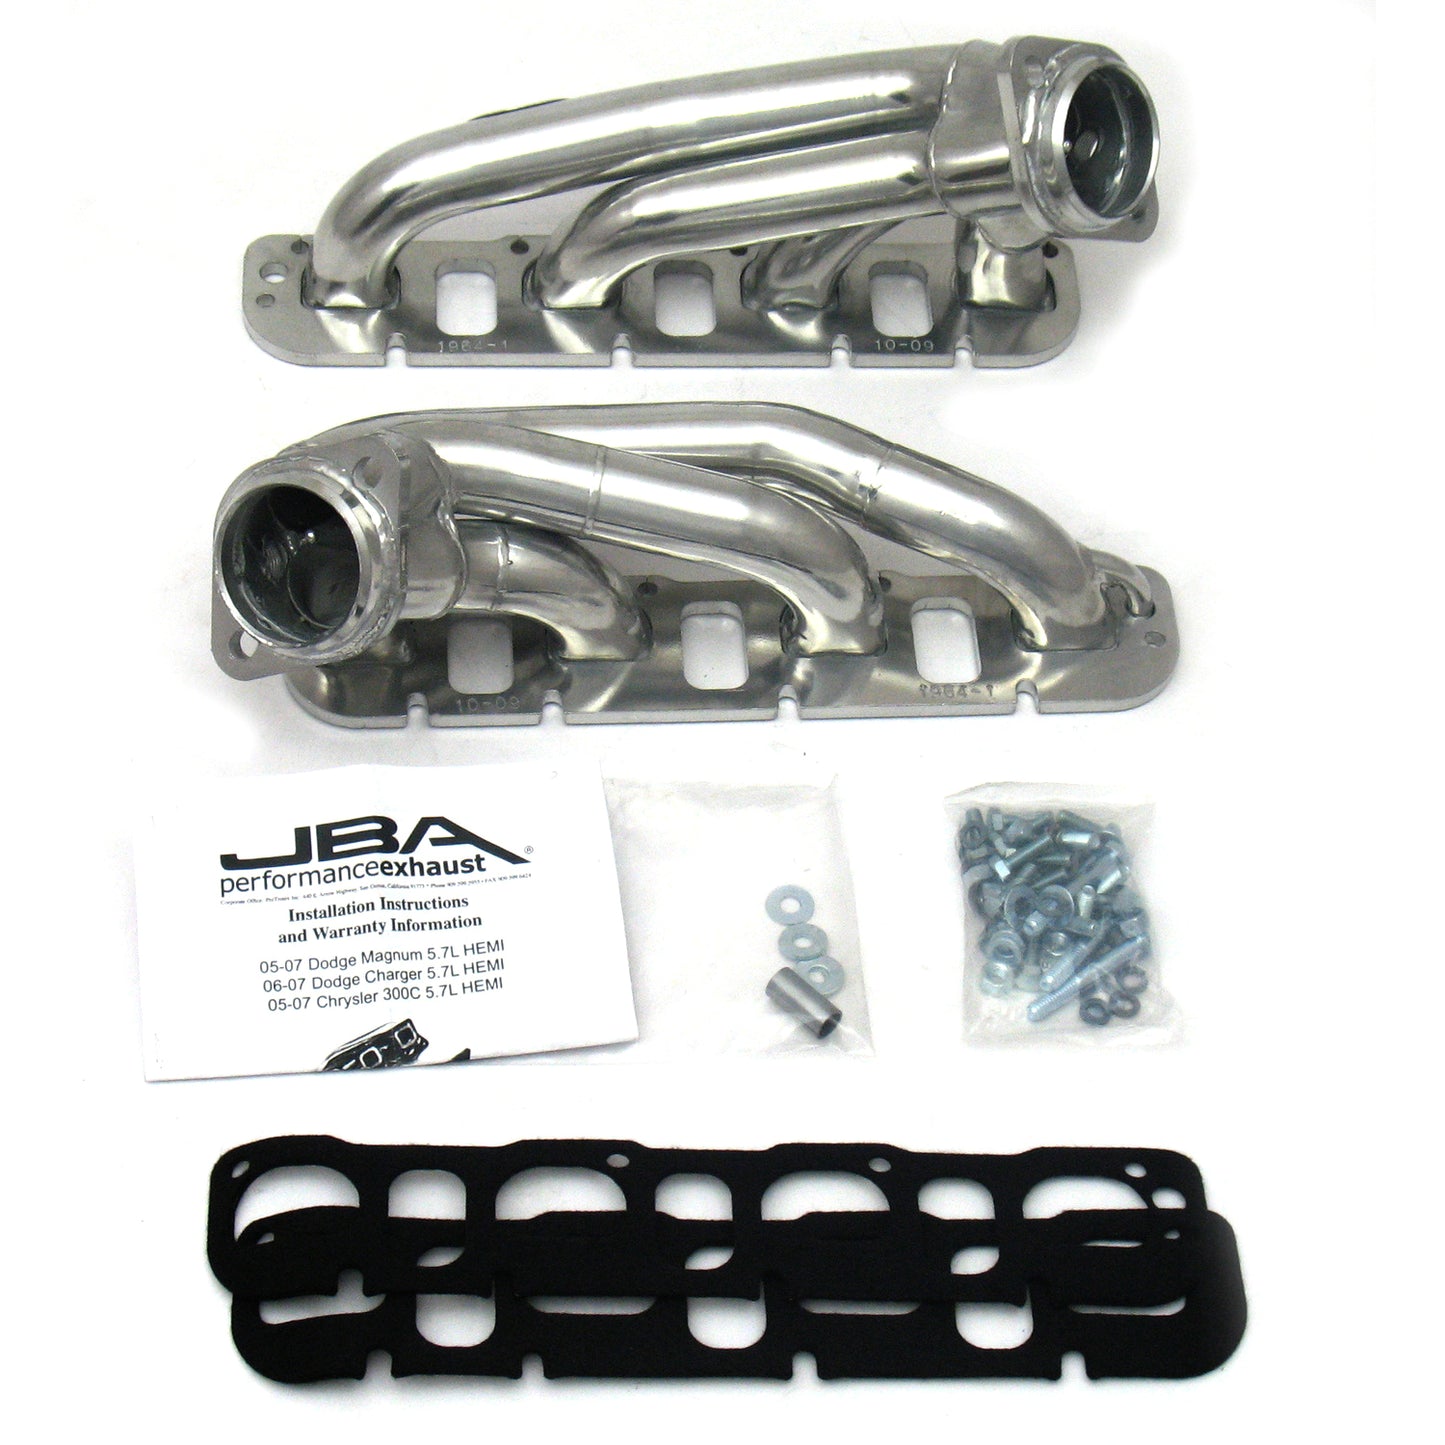 JBA Performance Exhaust 1964S-1JS 1 3/4" Header Shorty Stainless Steel 2009-2020 Challenger/ Charger/300C 09-10 Magnum 5.7L Silver Ceramic